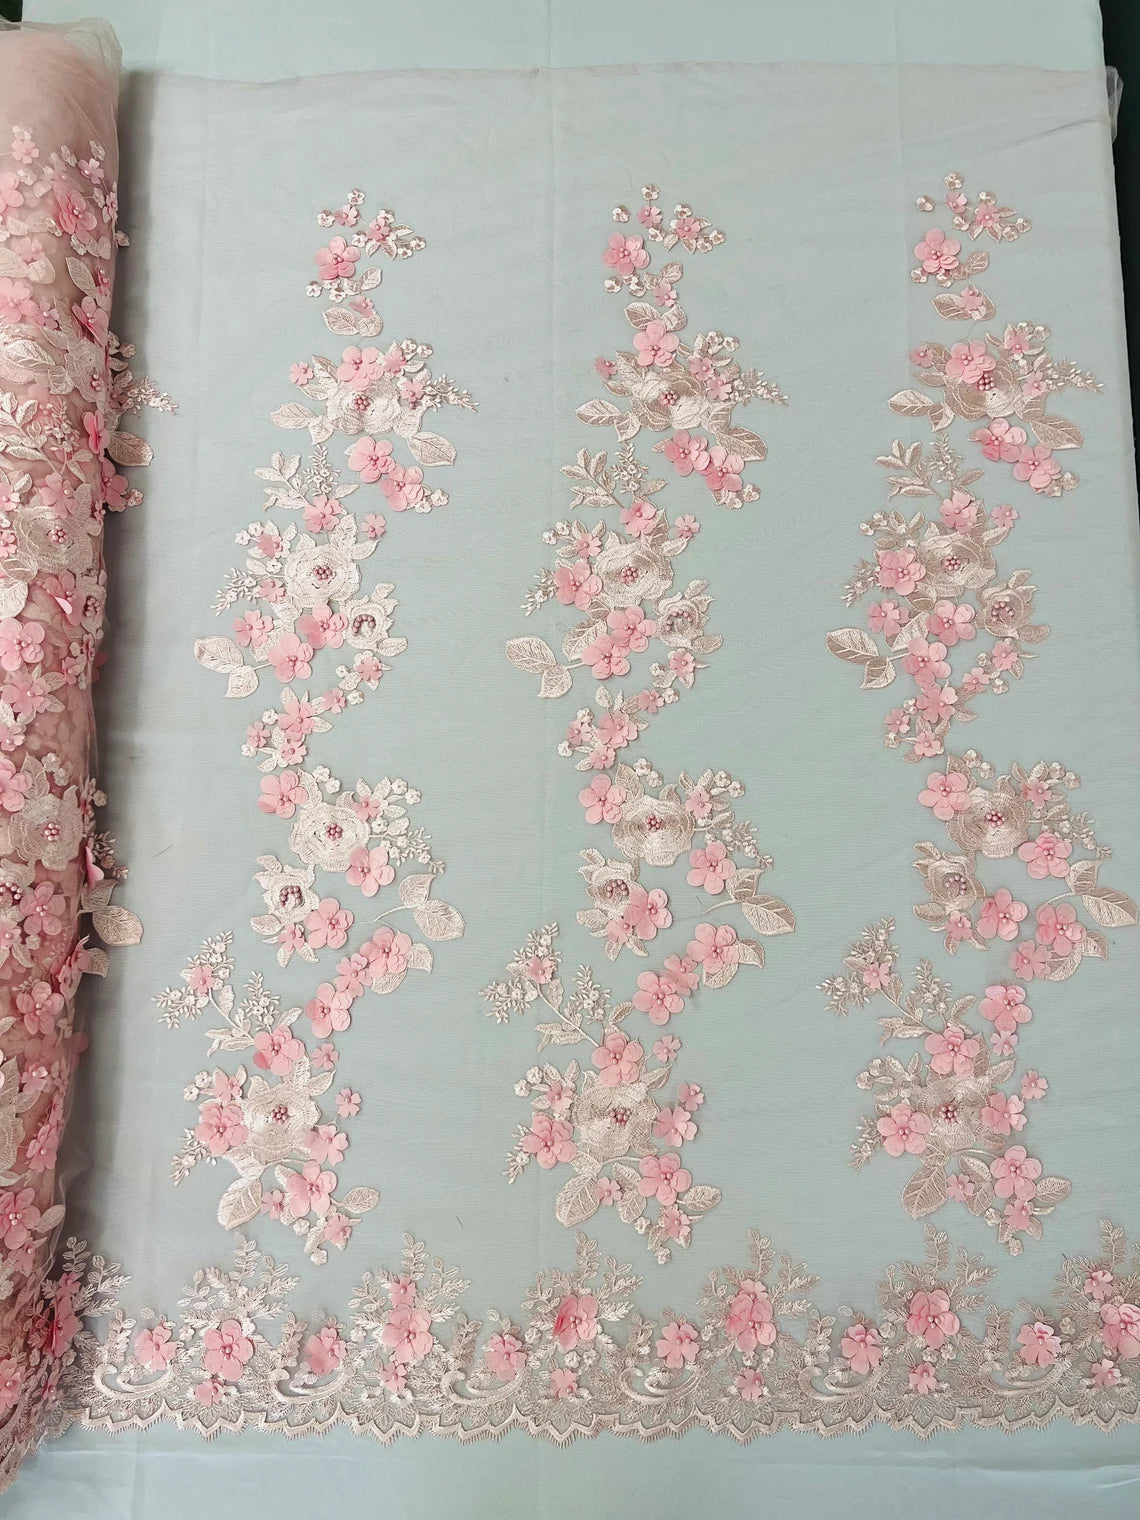 3D Flower Panels Fabric - Blush Pink - Flower Panels Bead Embroidered on Lace Fabric Sold By Yard